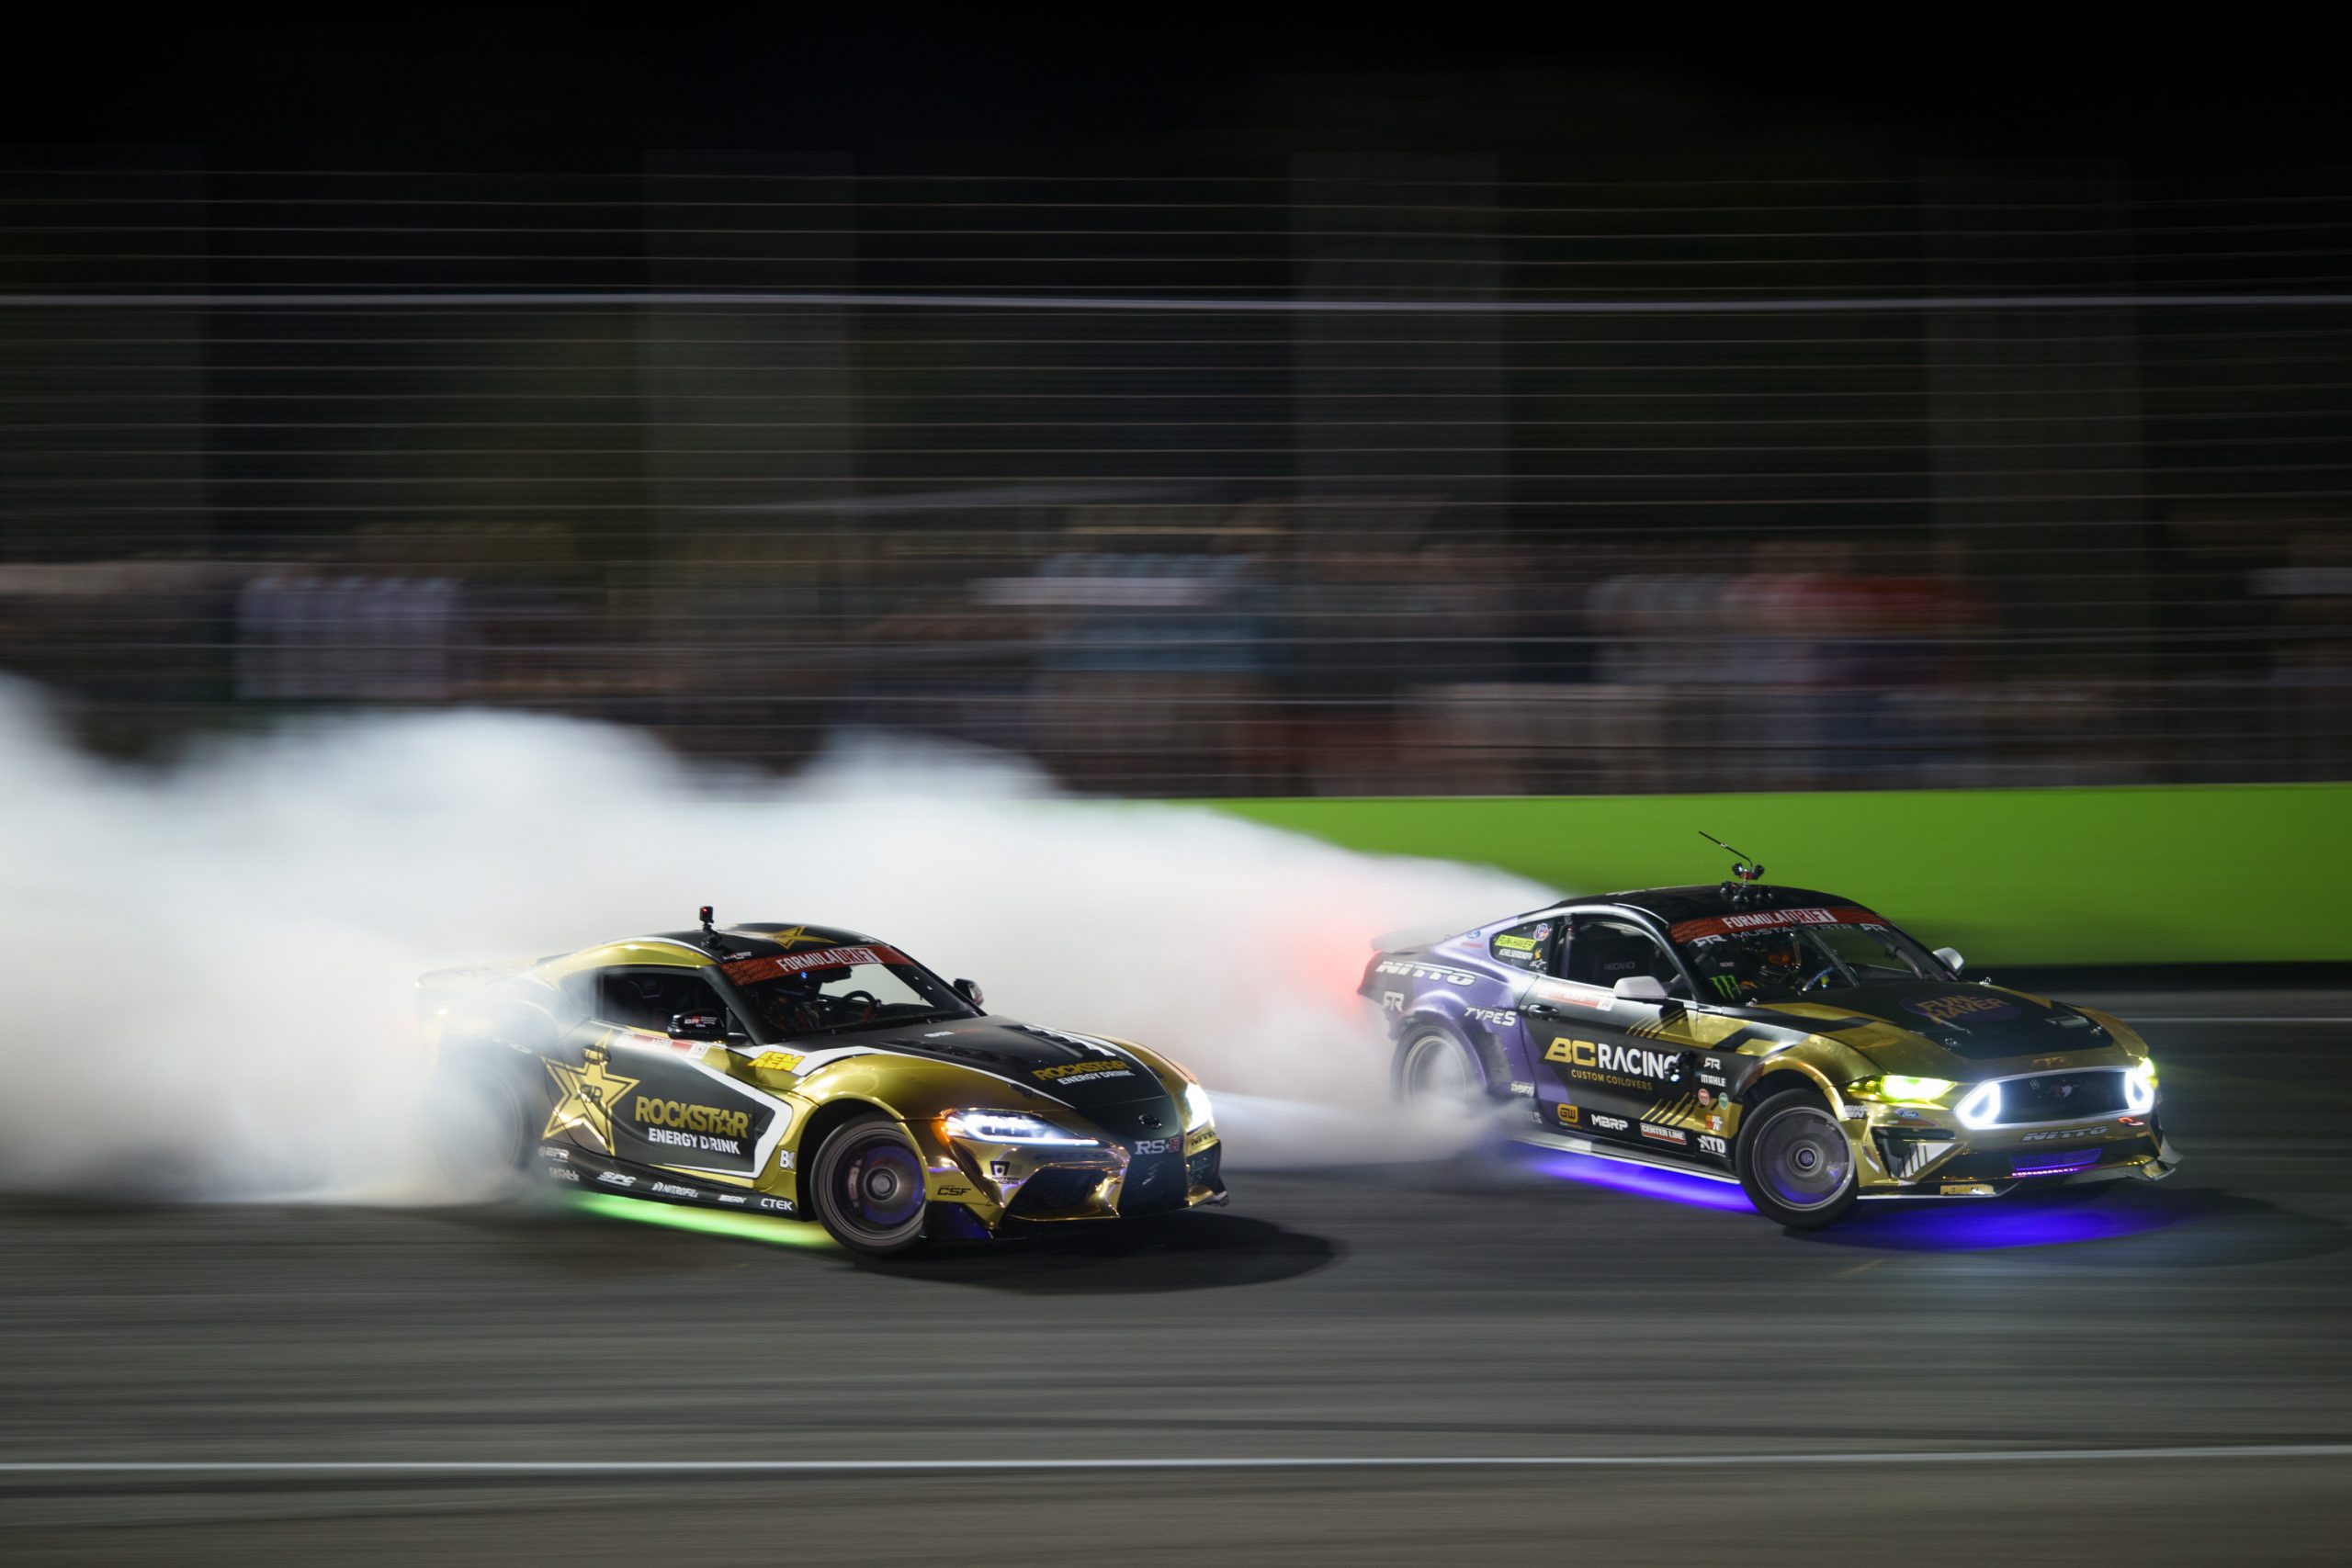 COMPETITION RESULTS FROM THE ORLANDO ROUND OF THE 2021 FORMULA DRIFT